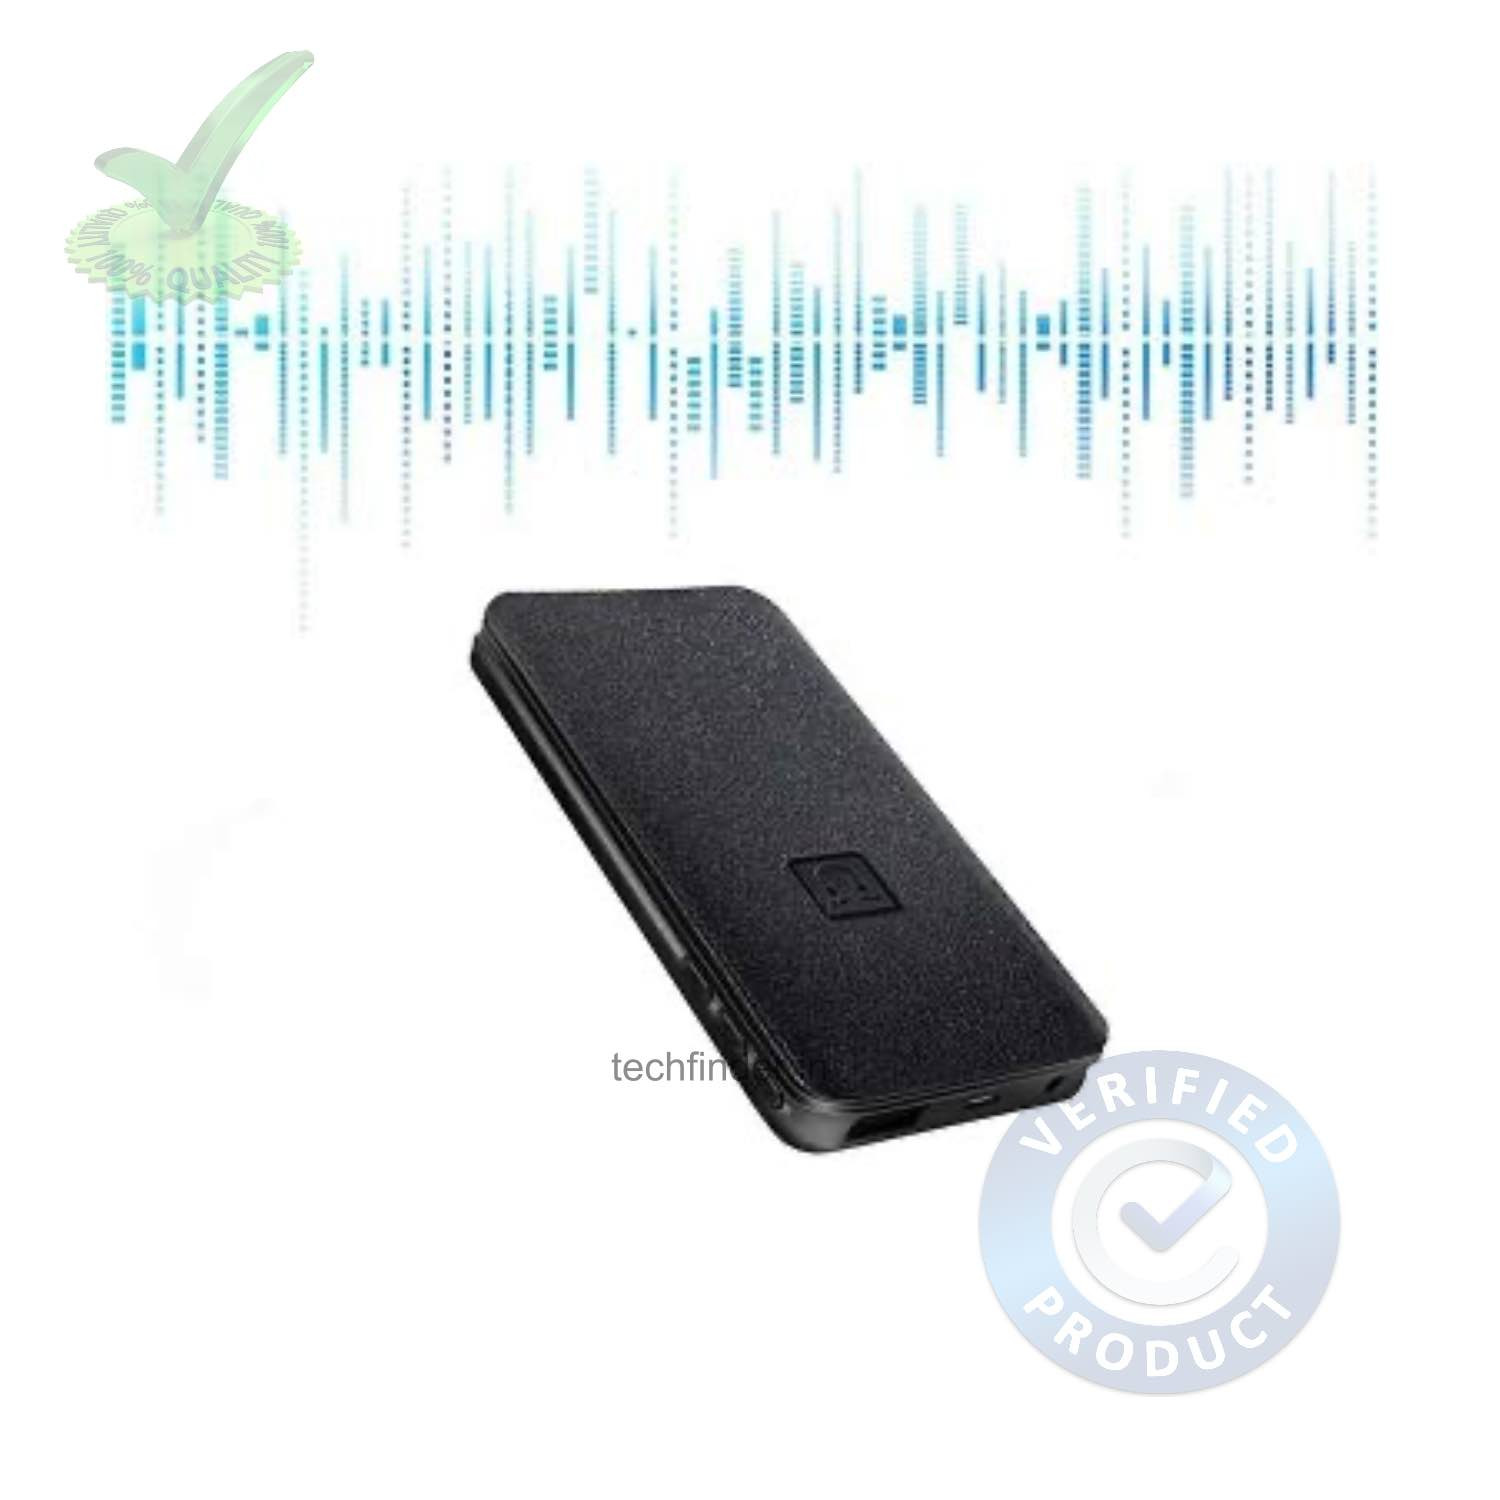 32GB Long Time Spy Hidden Voice Audio Recorder in Power Bank